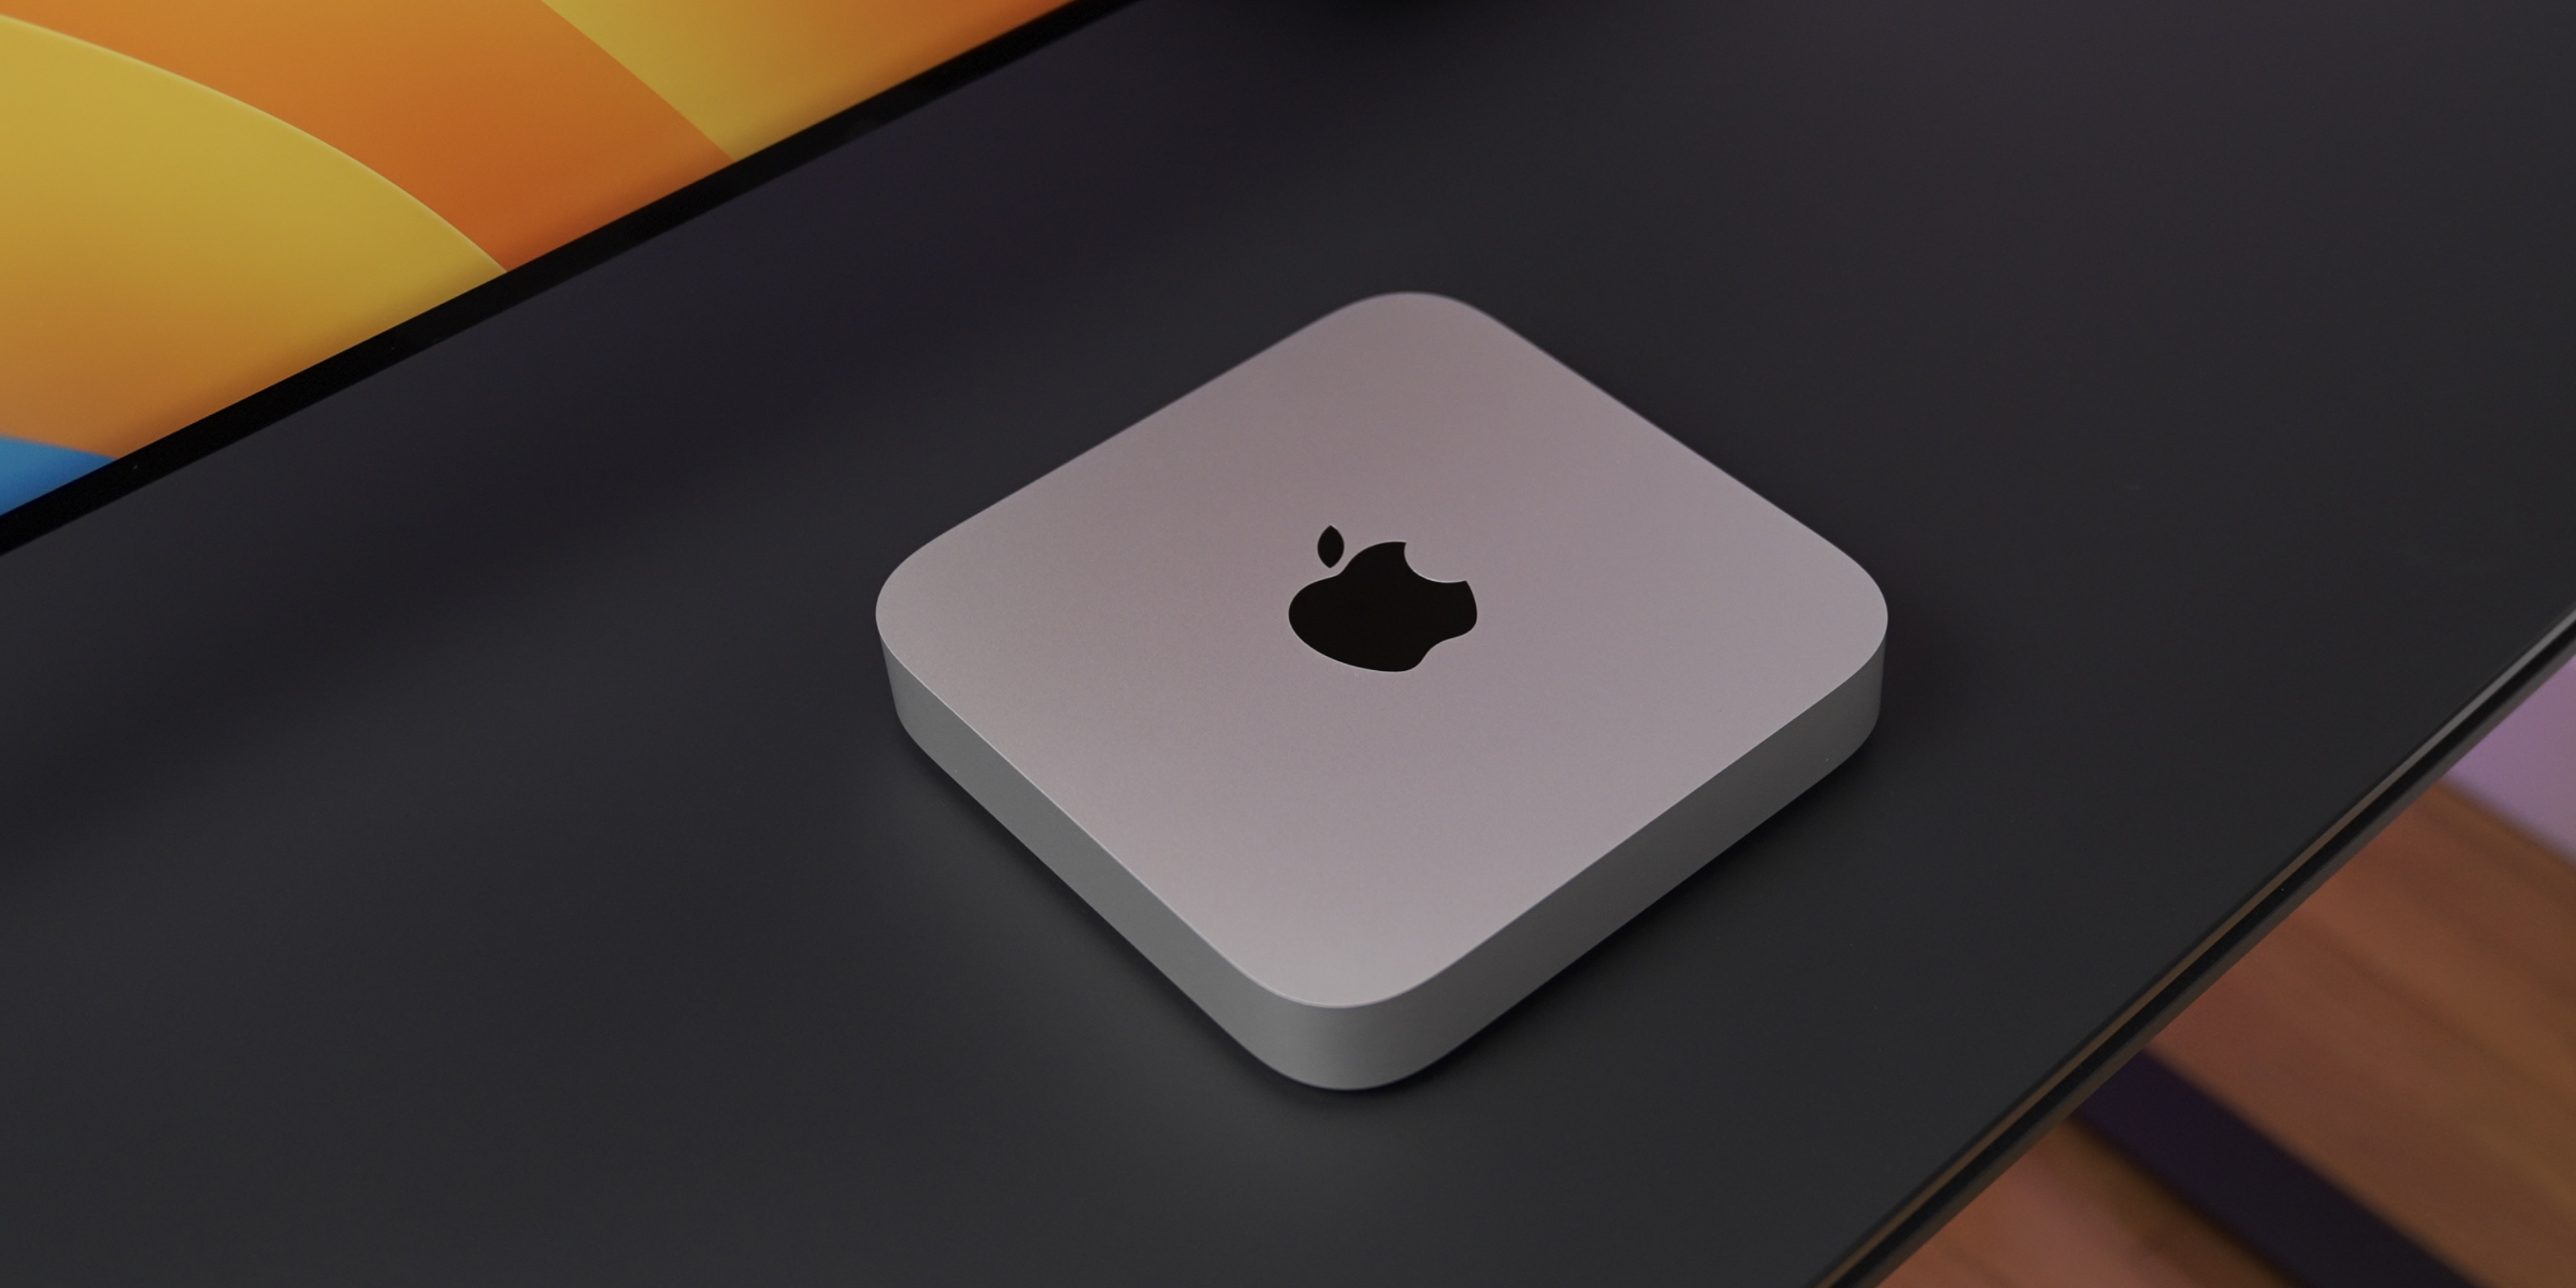 Top deal: M1 Mac mini with 16GB RAM drops to $799 ($100 off)